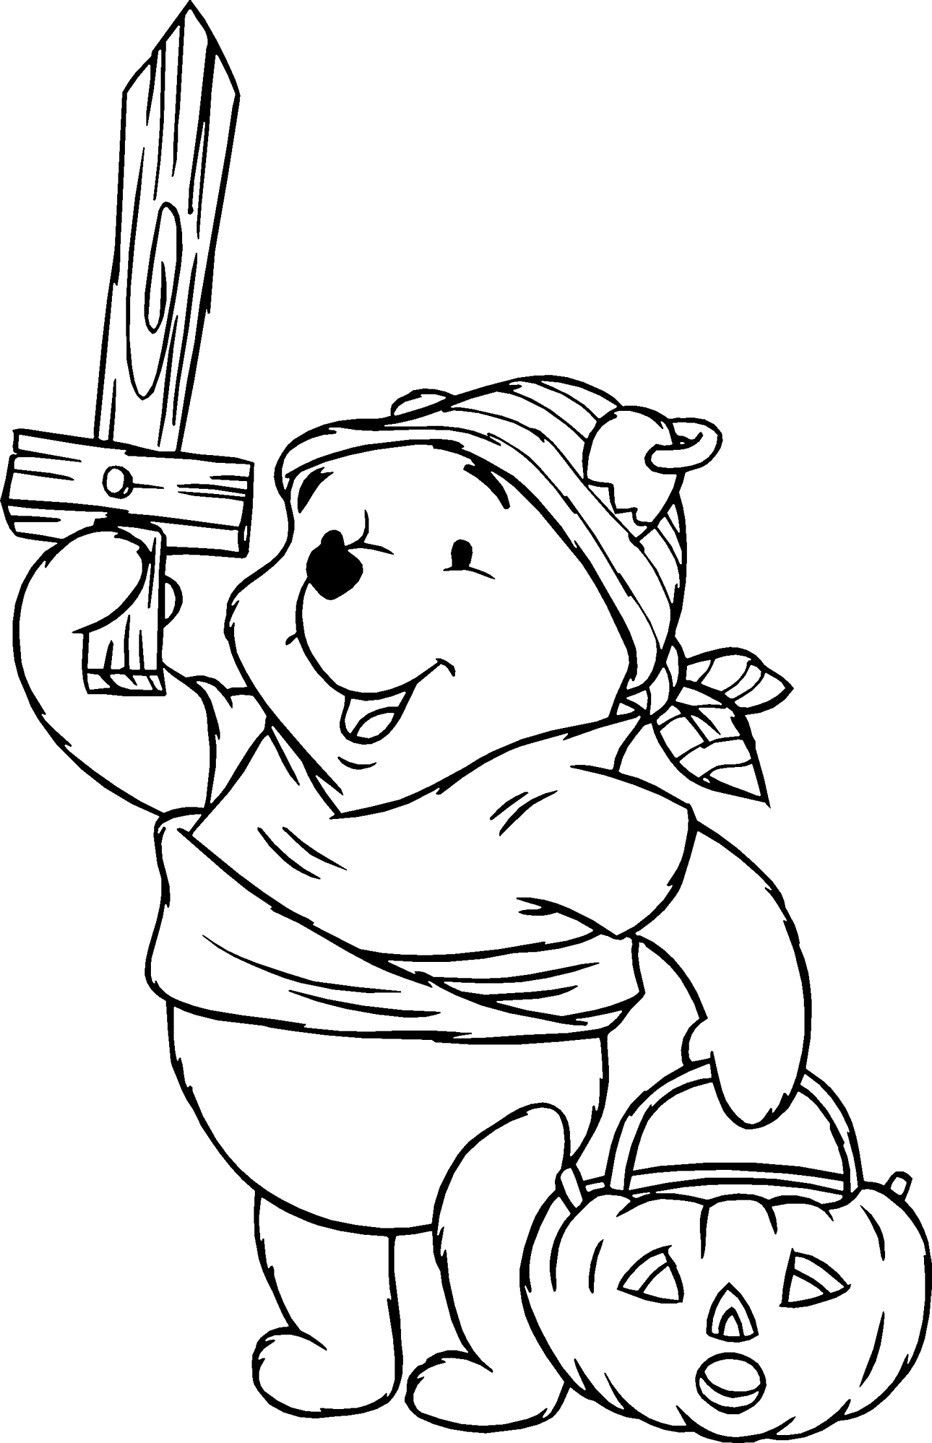 Coloring Pages For Kids Free
 24 Free Printable Halloween Coloring Pages for Kids